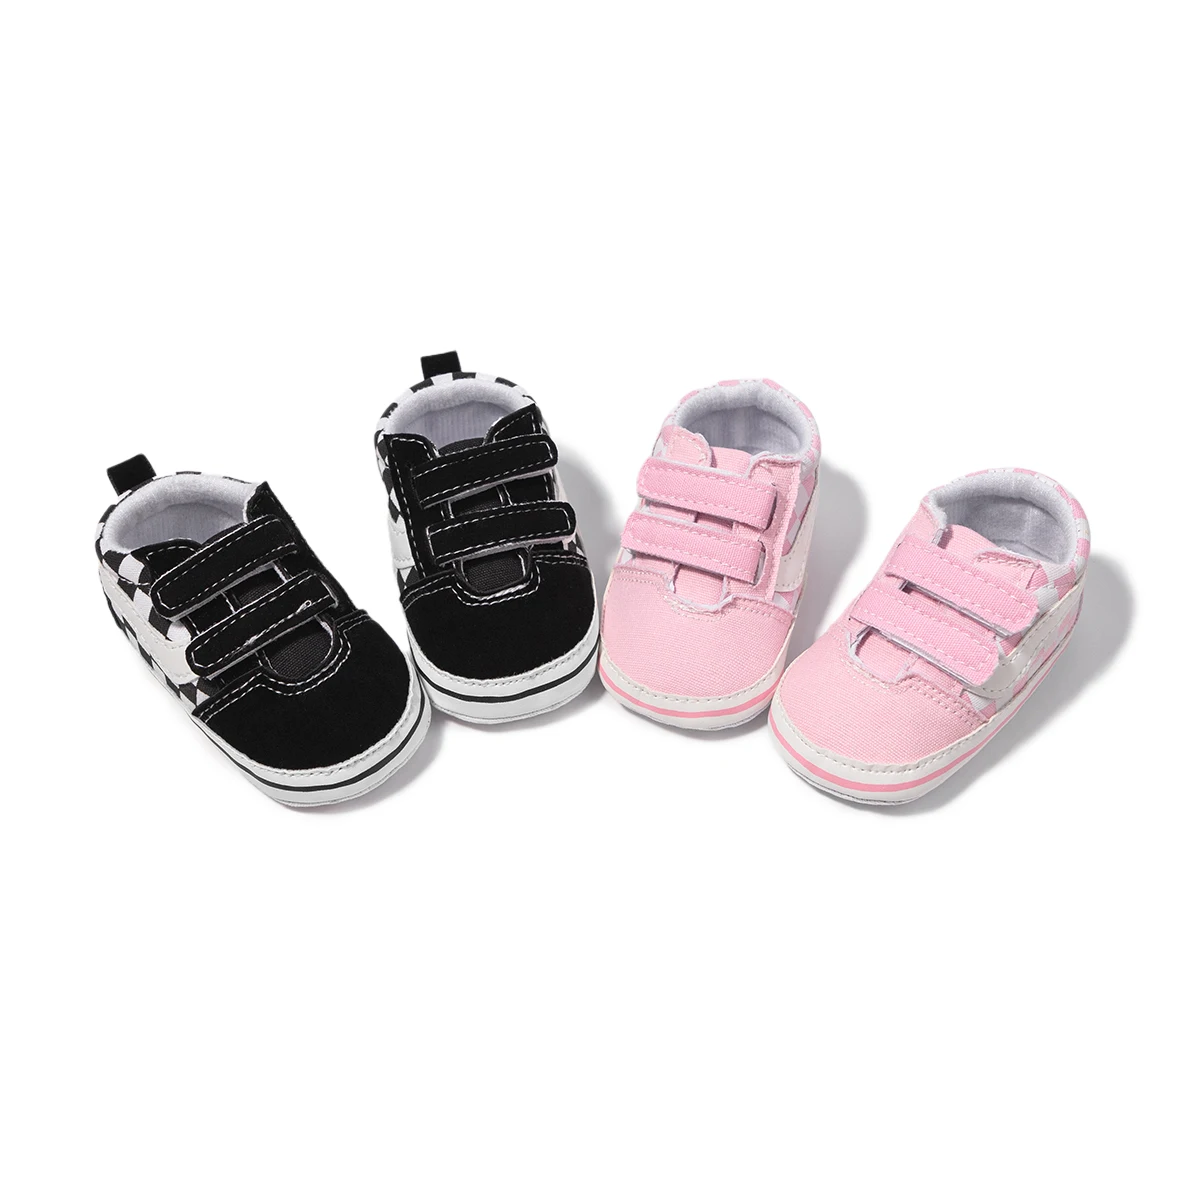 

MOQ 1 New fashion designs warm indoor toddler shoes Anti-Slippery cotton Soft sole baby shoes 2022, Pink,black,dark blue